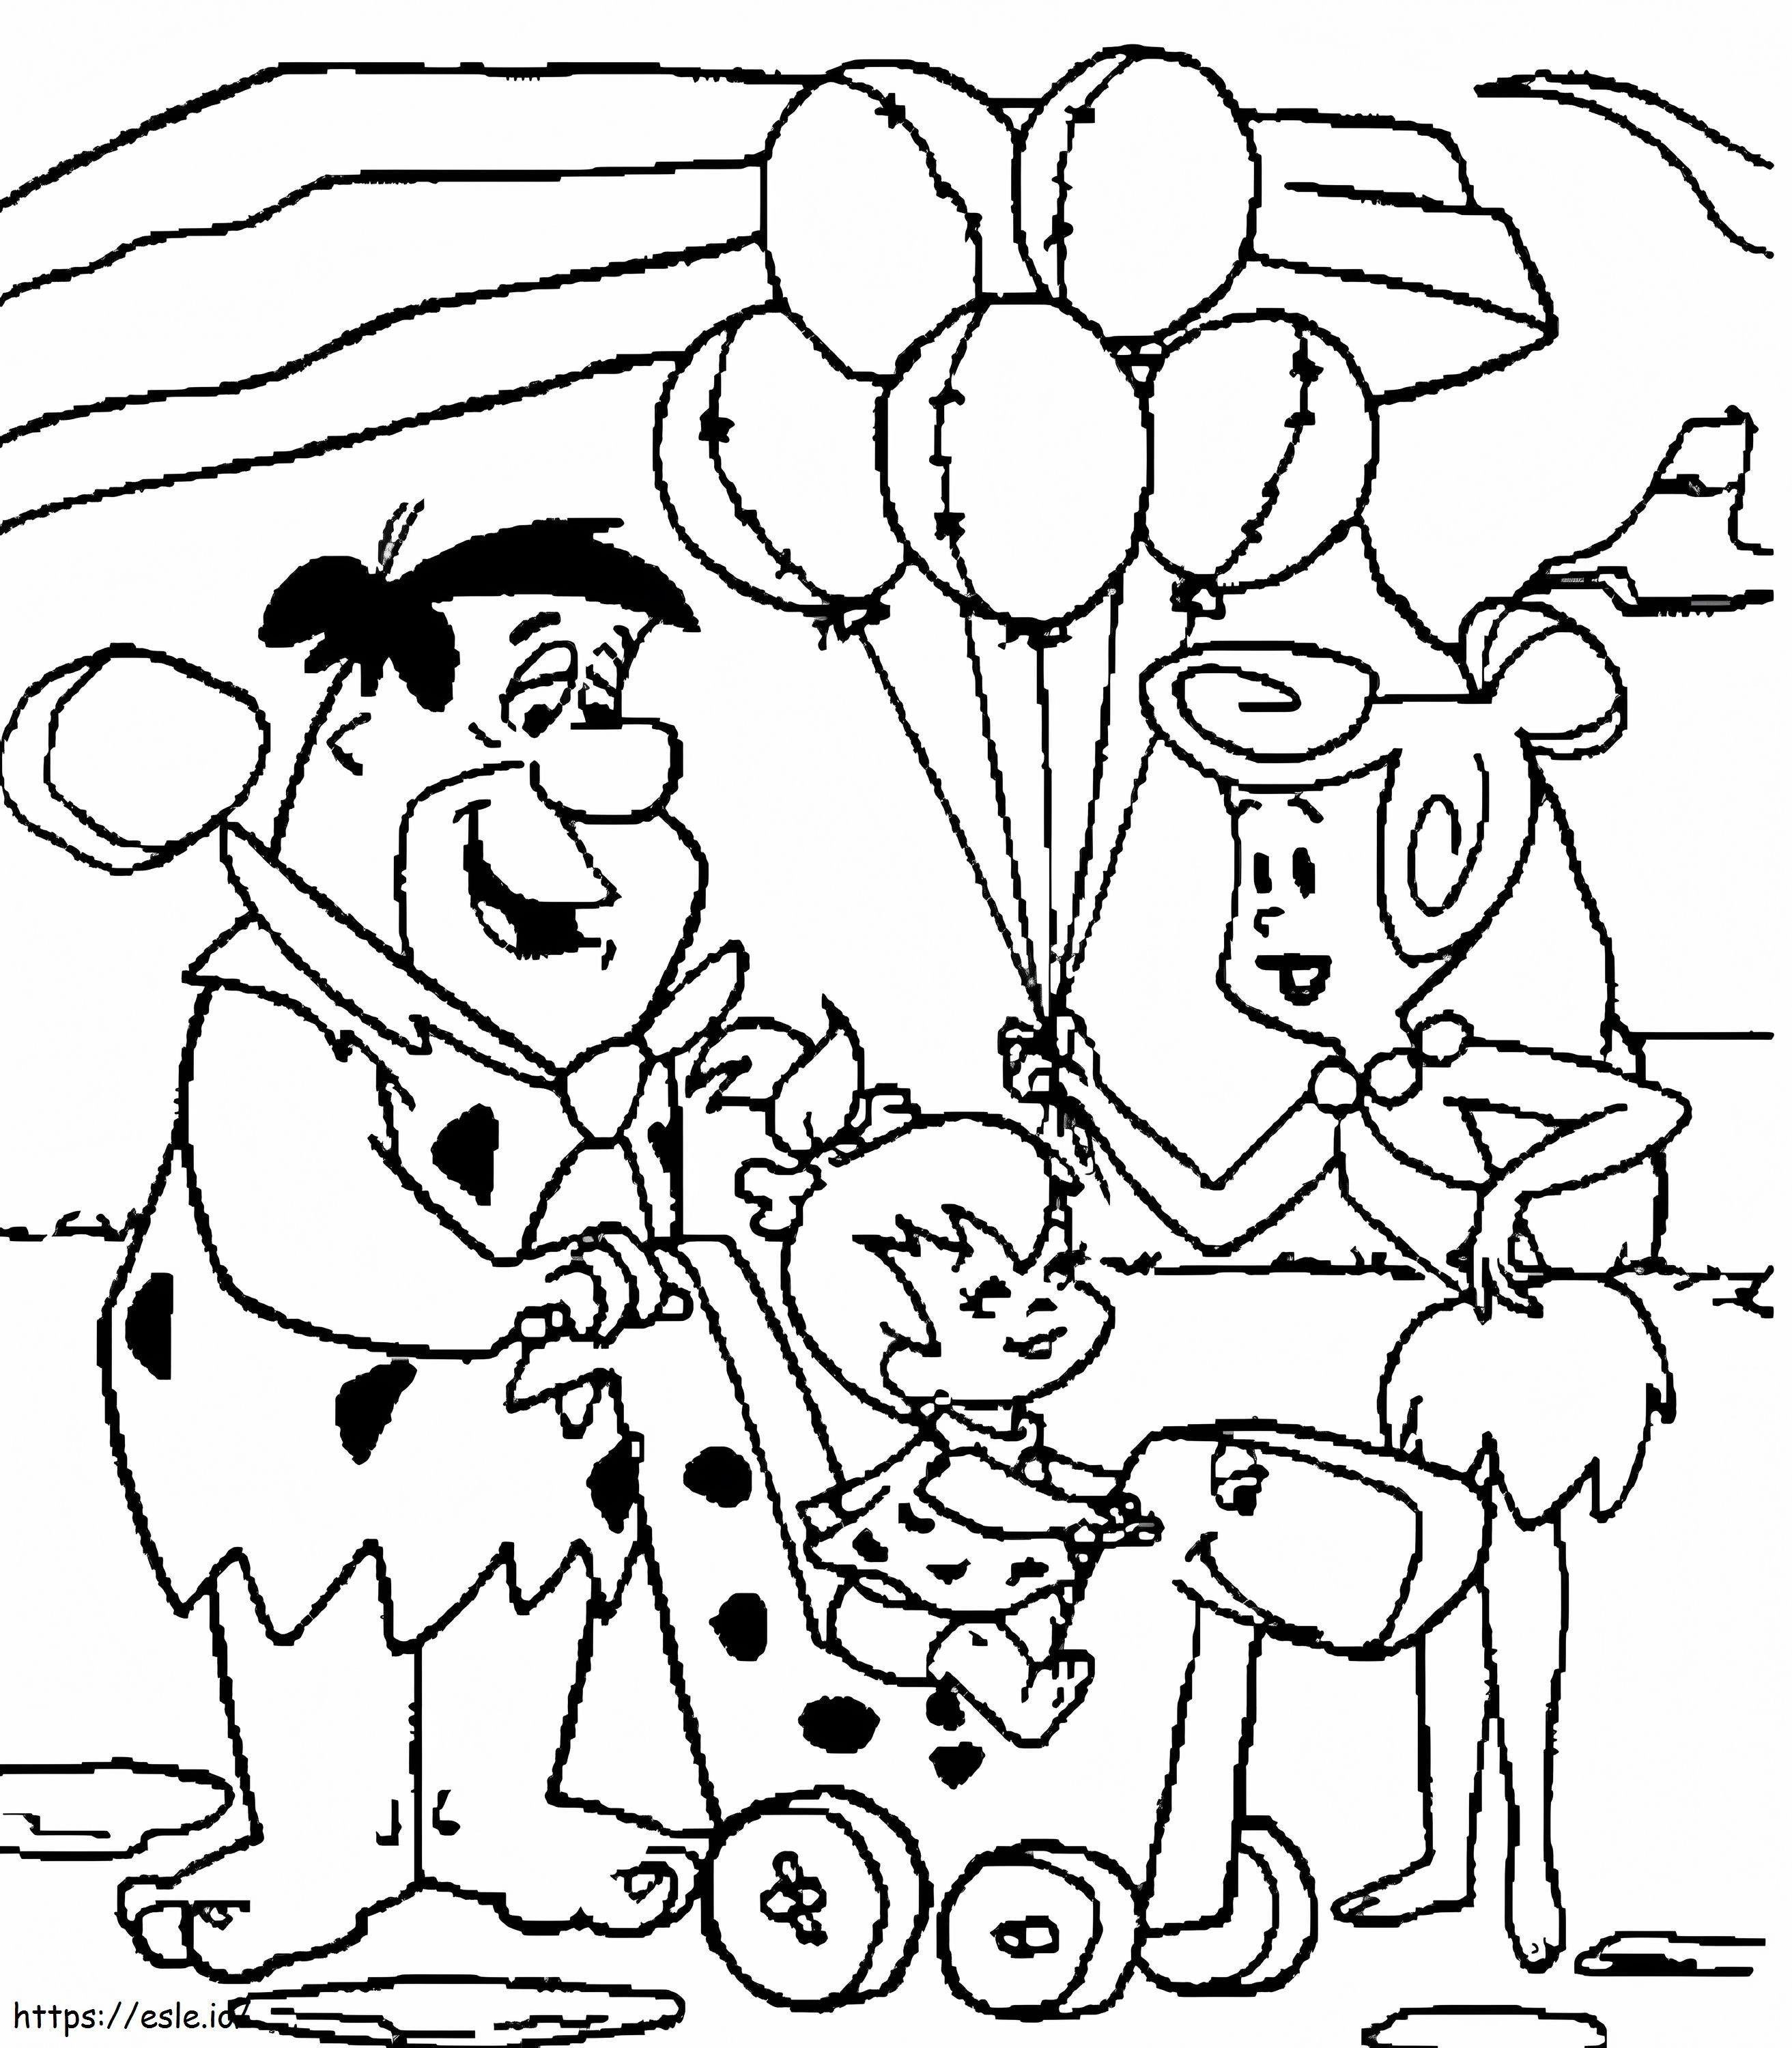 The Flintstones Family coloring page